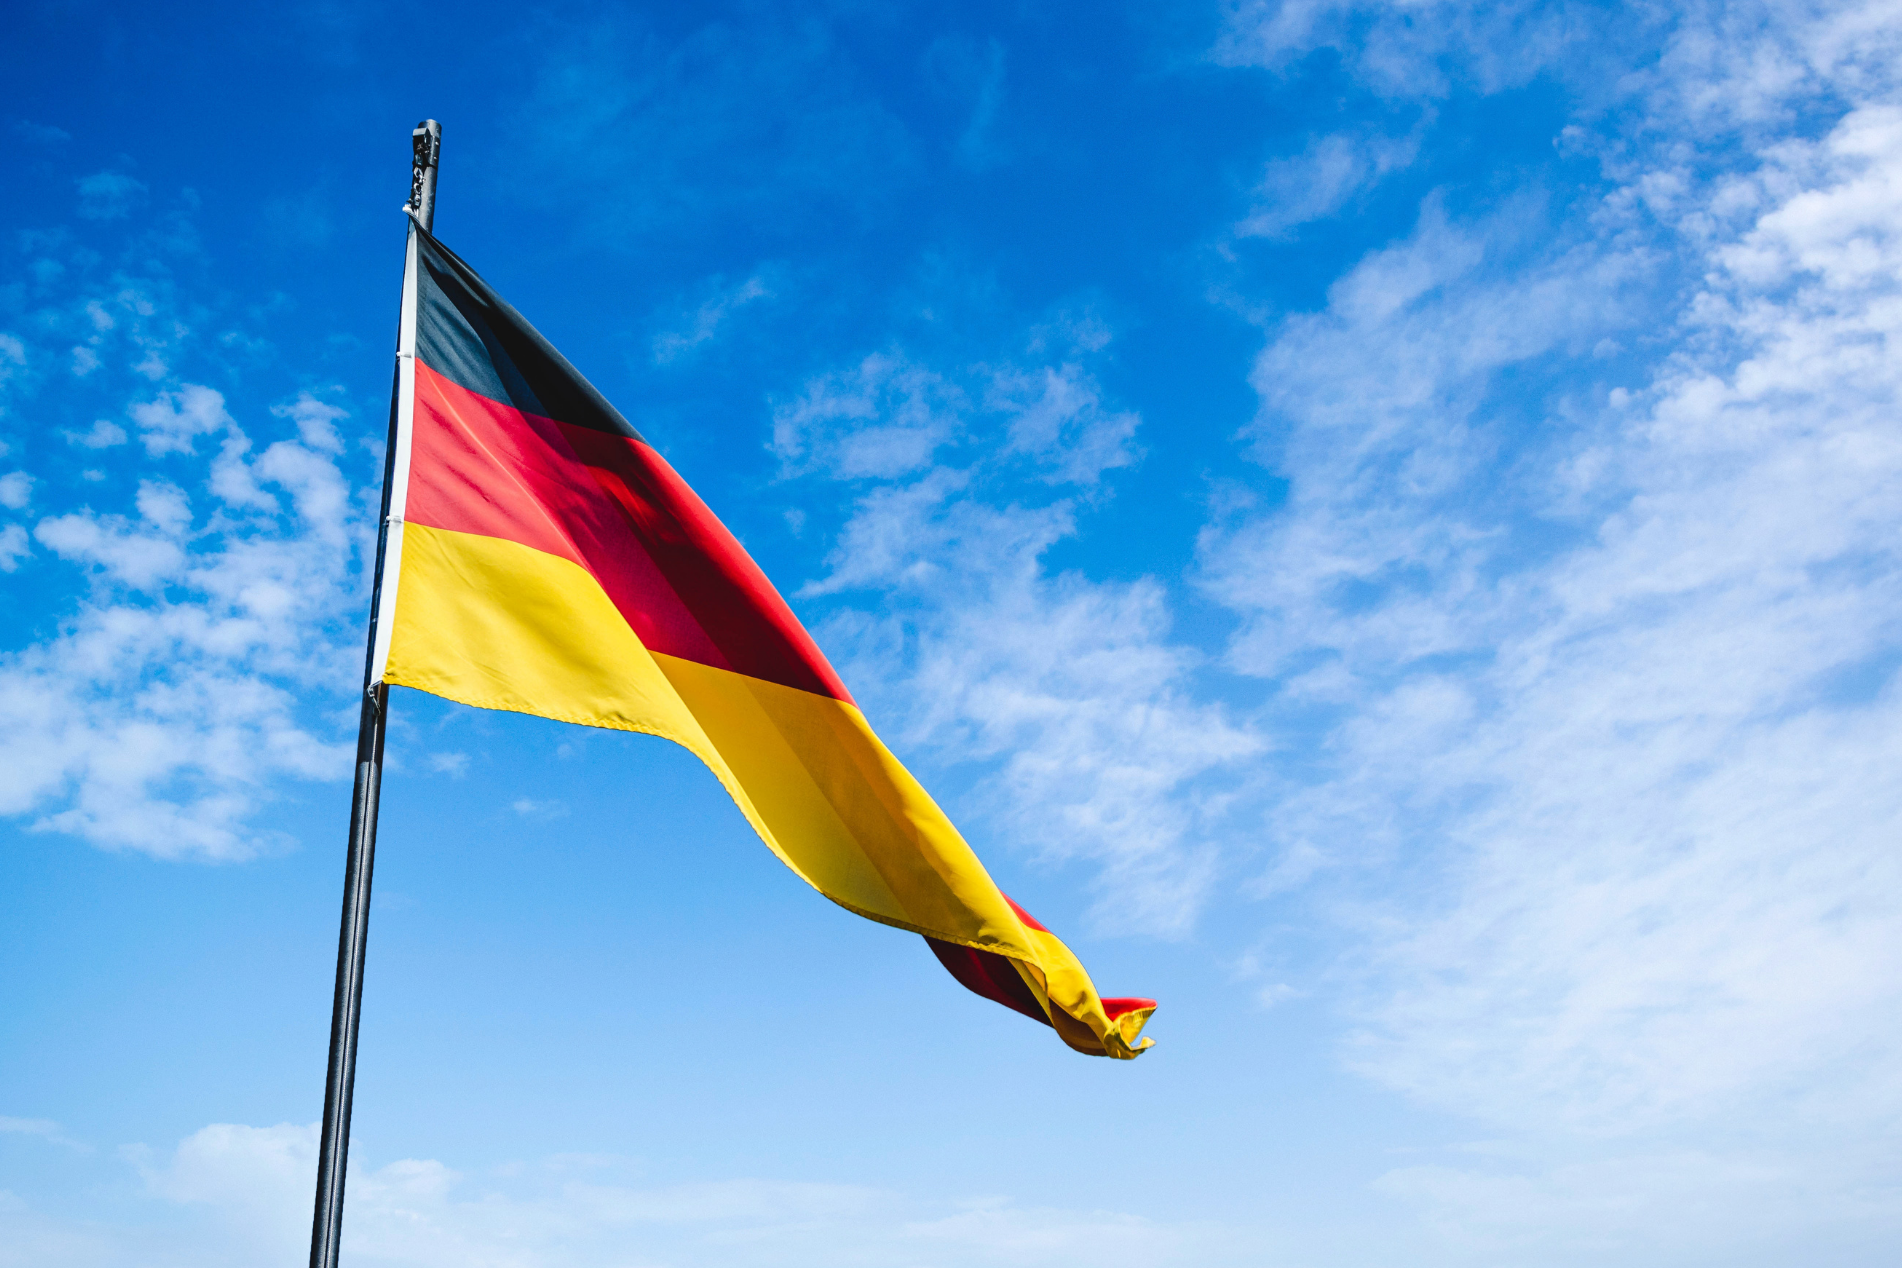 A German flag flying in a blue sky with white cloud